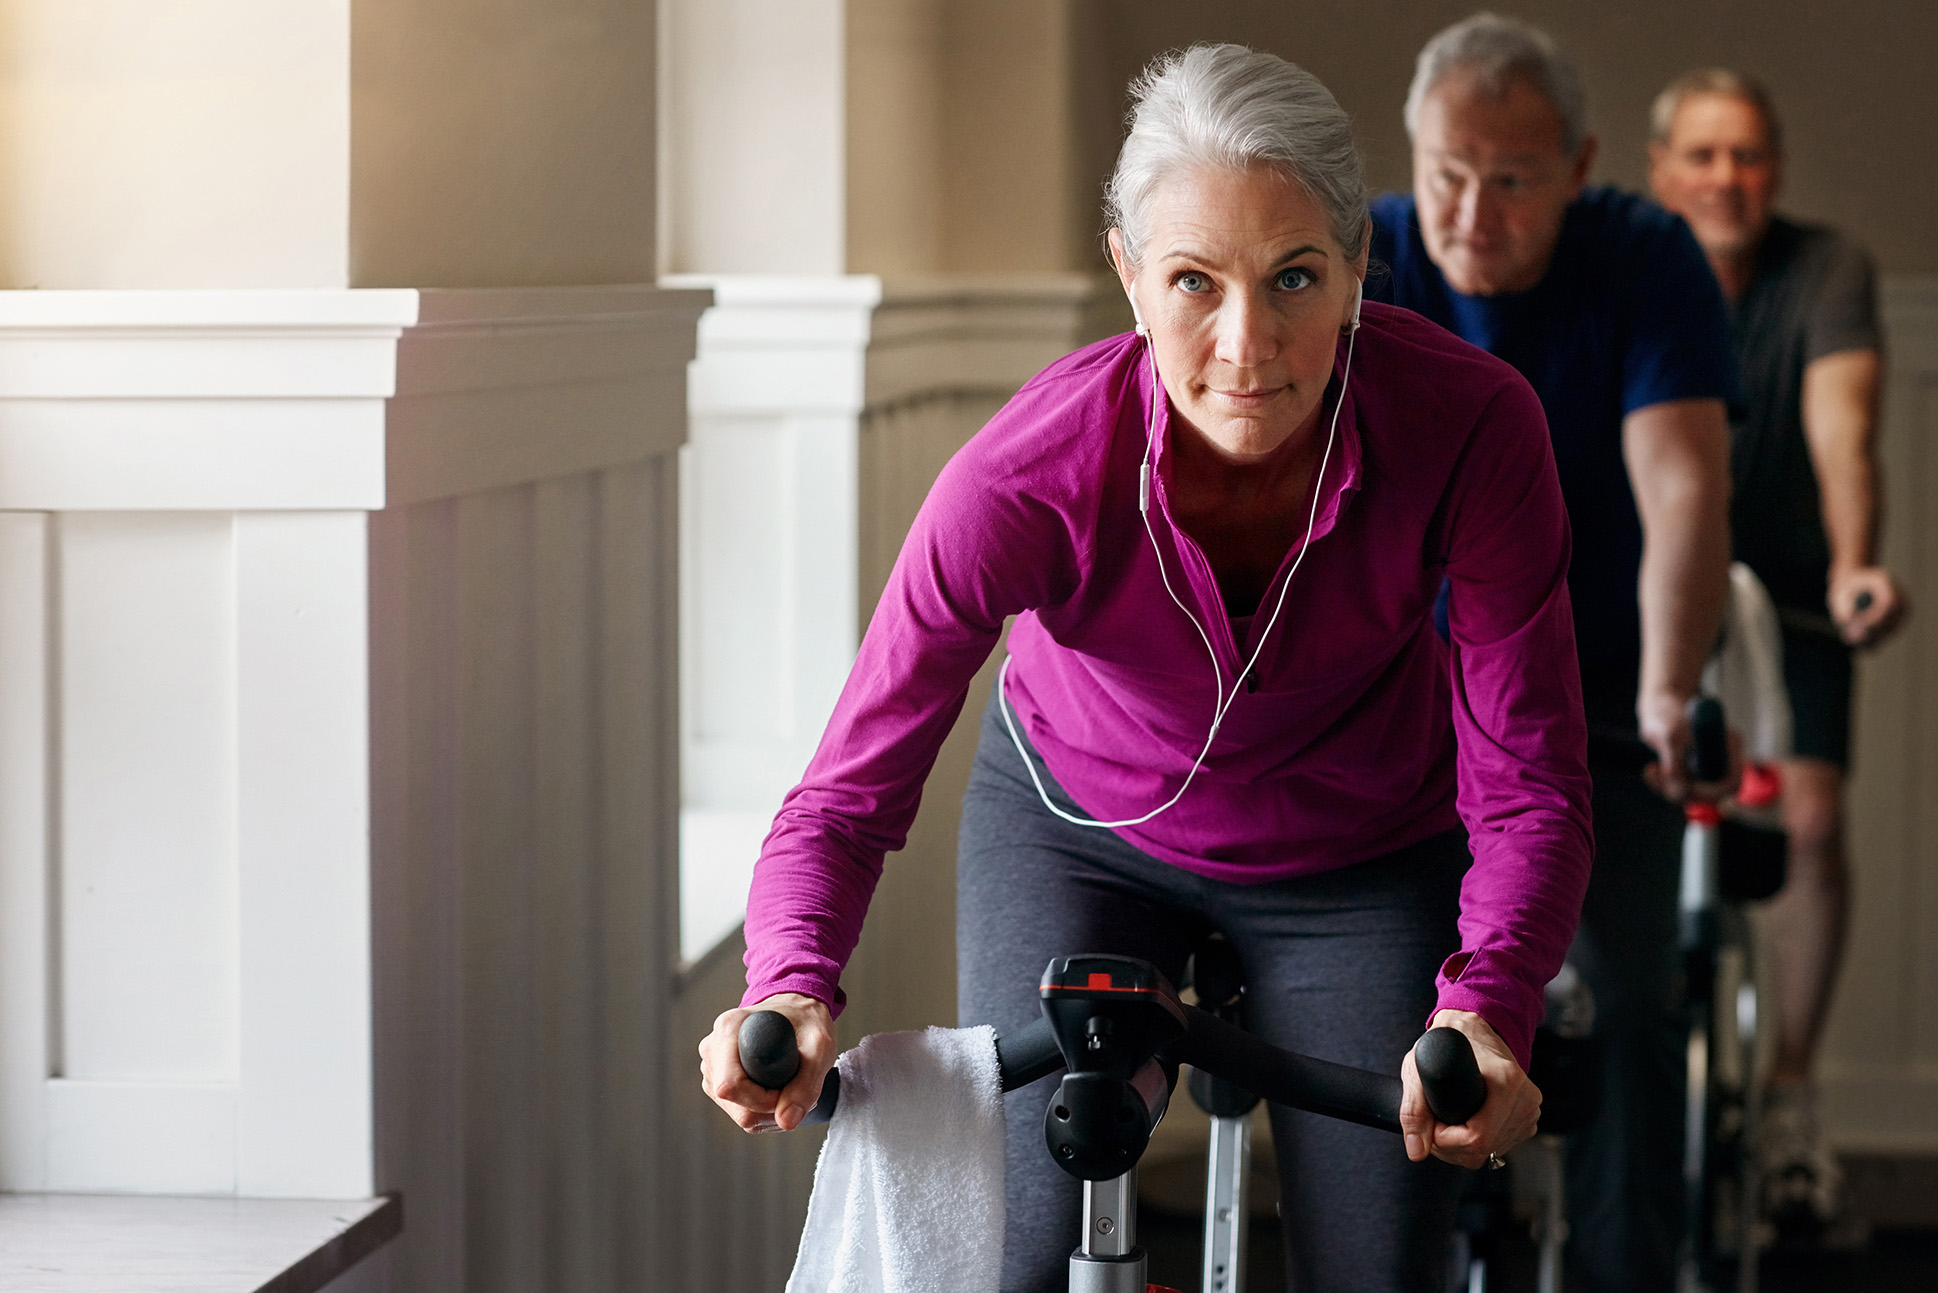 Is Exercise Bad for Dementia Patients? A New Study Makes Odd Claim